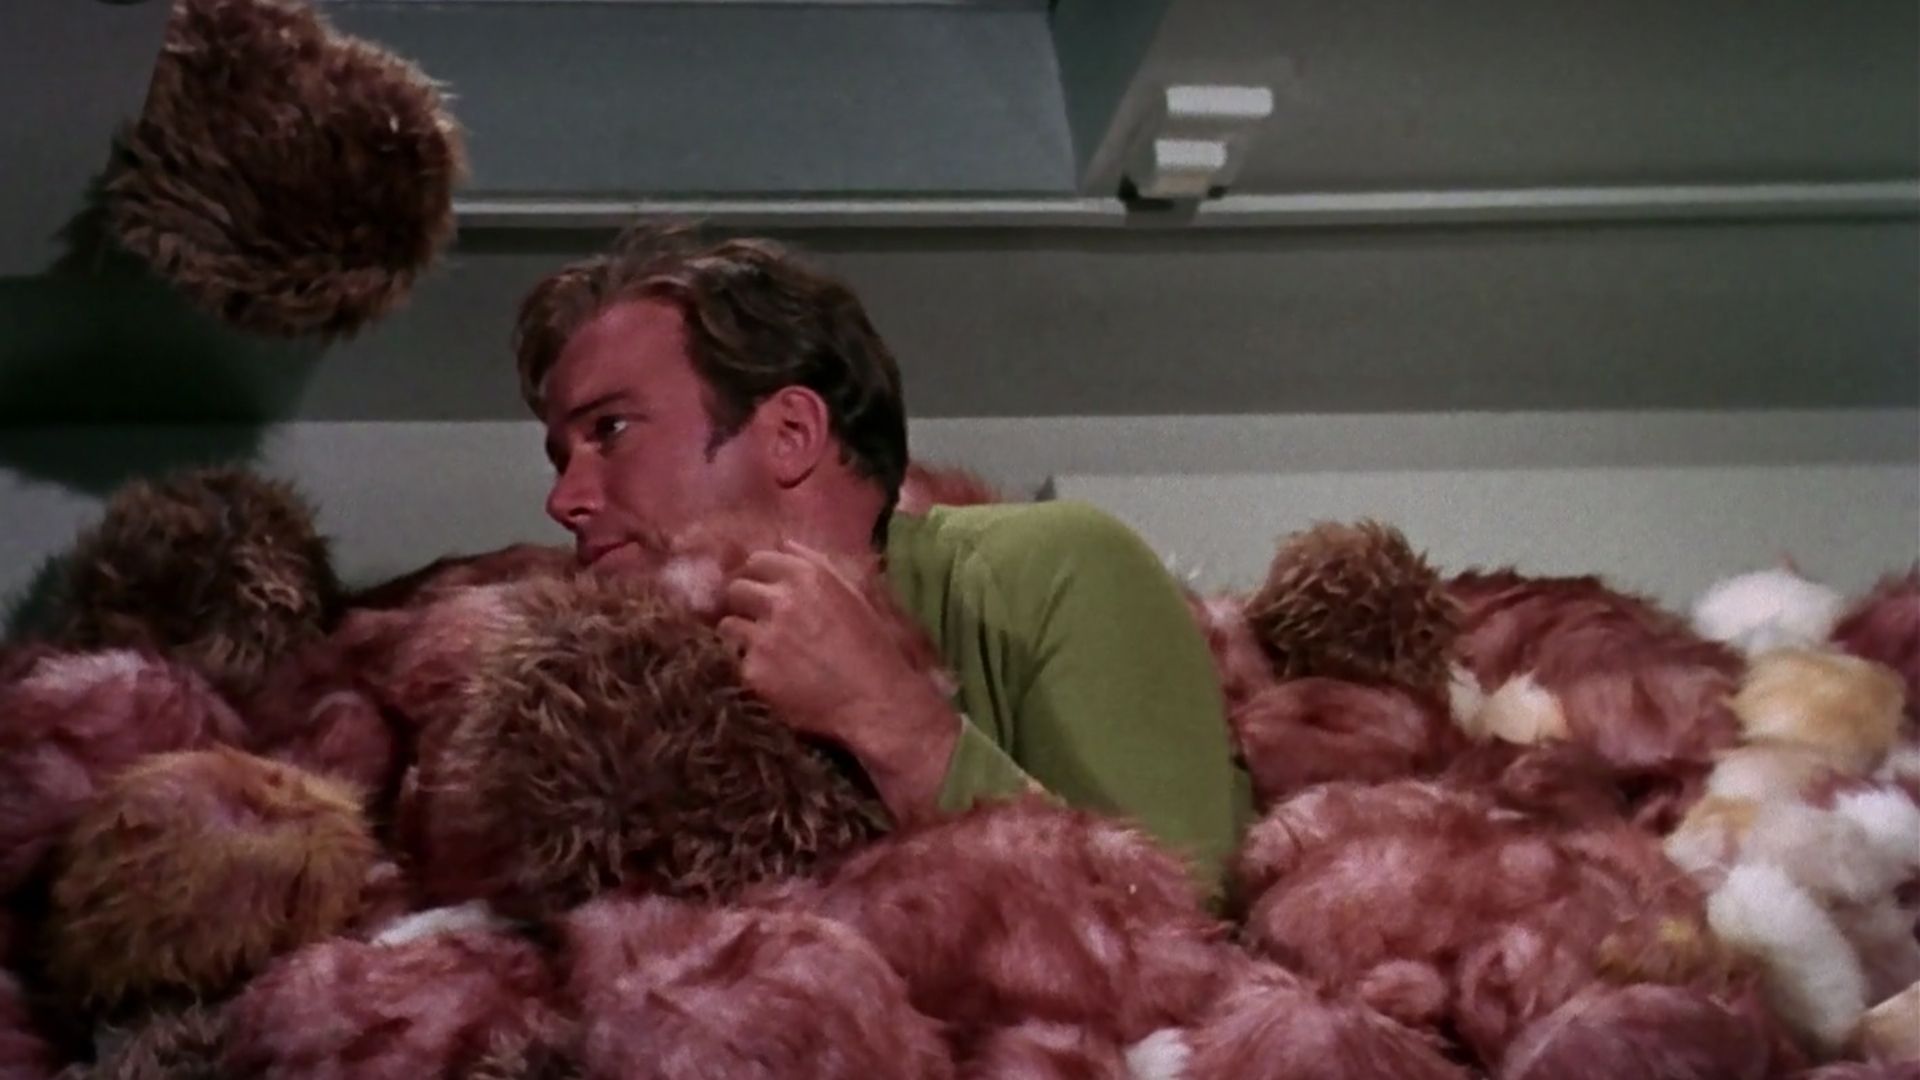 <p>                     <strong>Season 2, Episode 15</strong>                   </p>                                      <p>                     <strong>Original airdate: </strong>Dec 29, 1967                    </p>                                      <p>                     Star Trek: TOS tackled plenty of serious social issues across its three seasons, but it wasn’t afraid to be funny, too. The Trouble With Tribbles is pure sitcom as the crew of the Enterprise discovers, adores, and then is slowly overtaken by the furry, purring creatures of the title.                    </p>                                      <p>                     Kirk alternately sits on one that’s found its way to the Captain’s chair, then finds himself buried in them after opening an overhead compartment. It’s a low-stakes, iconic romp that would later be revisited in the Deep Space Nine episode Trials and Tribble-ations.                   </p>